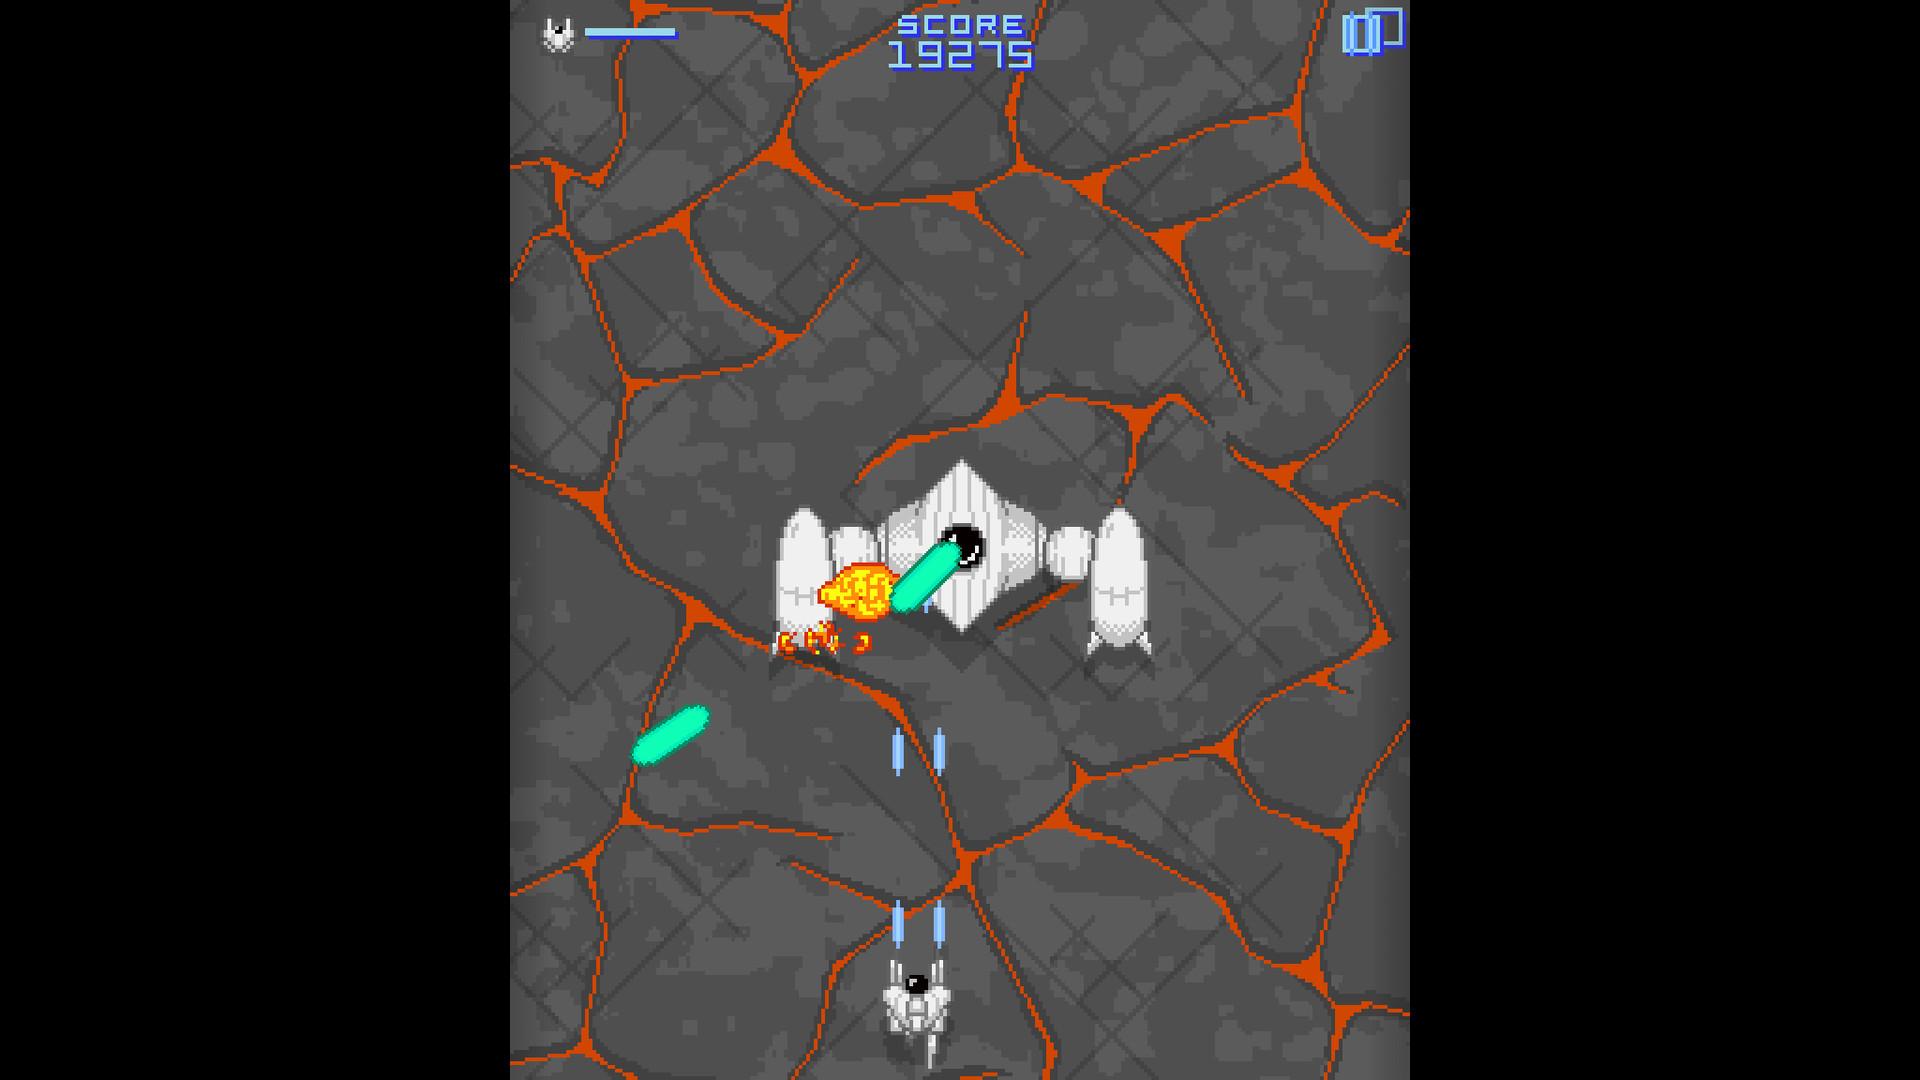 Screenshot №4 from game Mobile Astro